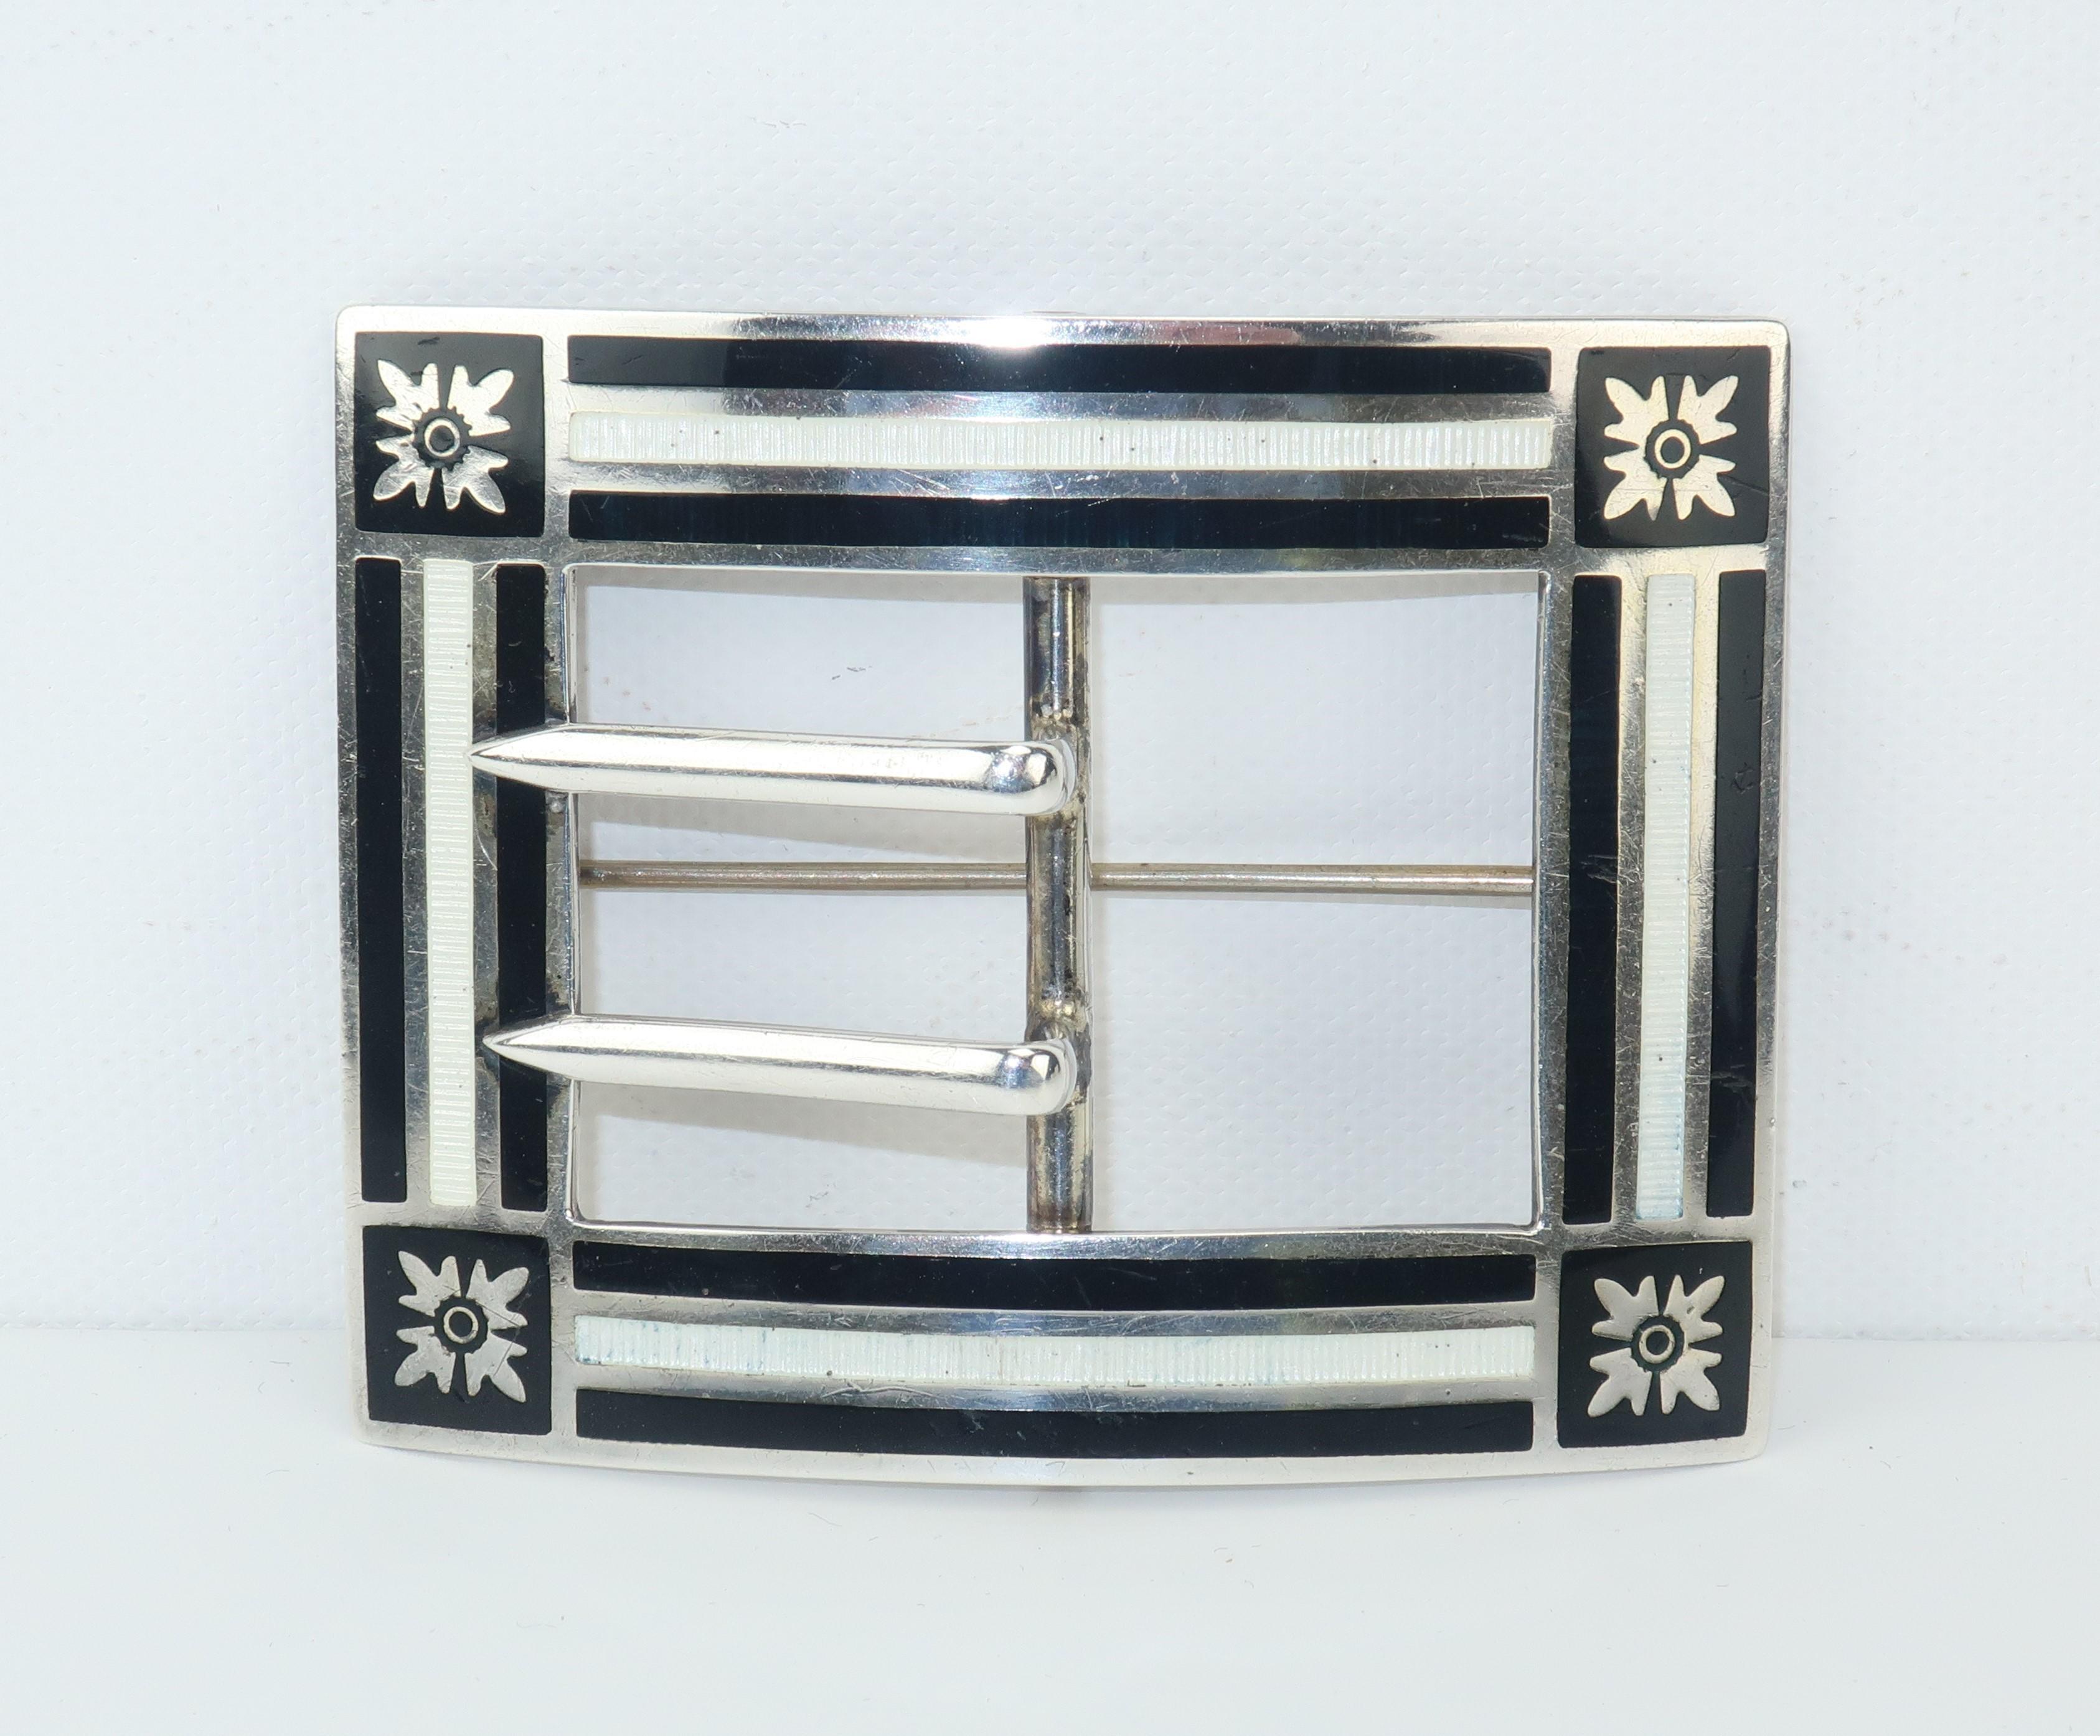 A well placed antique brooch can add stylish character to a jacket or coat and give a modern look a touch of the past.  This early 20th century sterling silver brooch has an unusually modernist style created by a black and white guilloche enamel